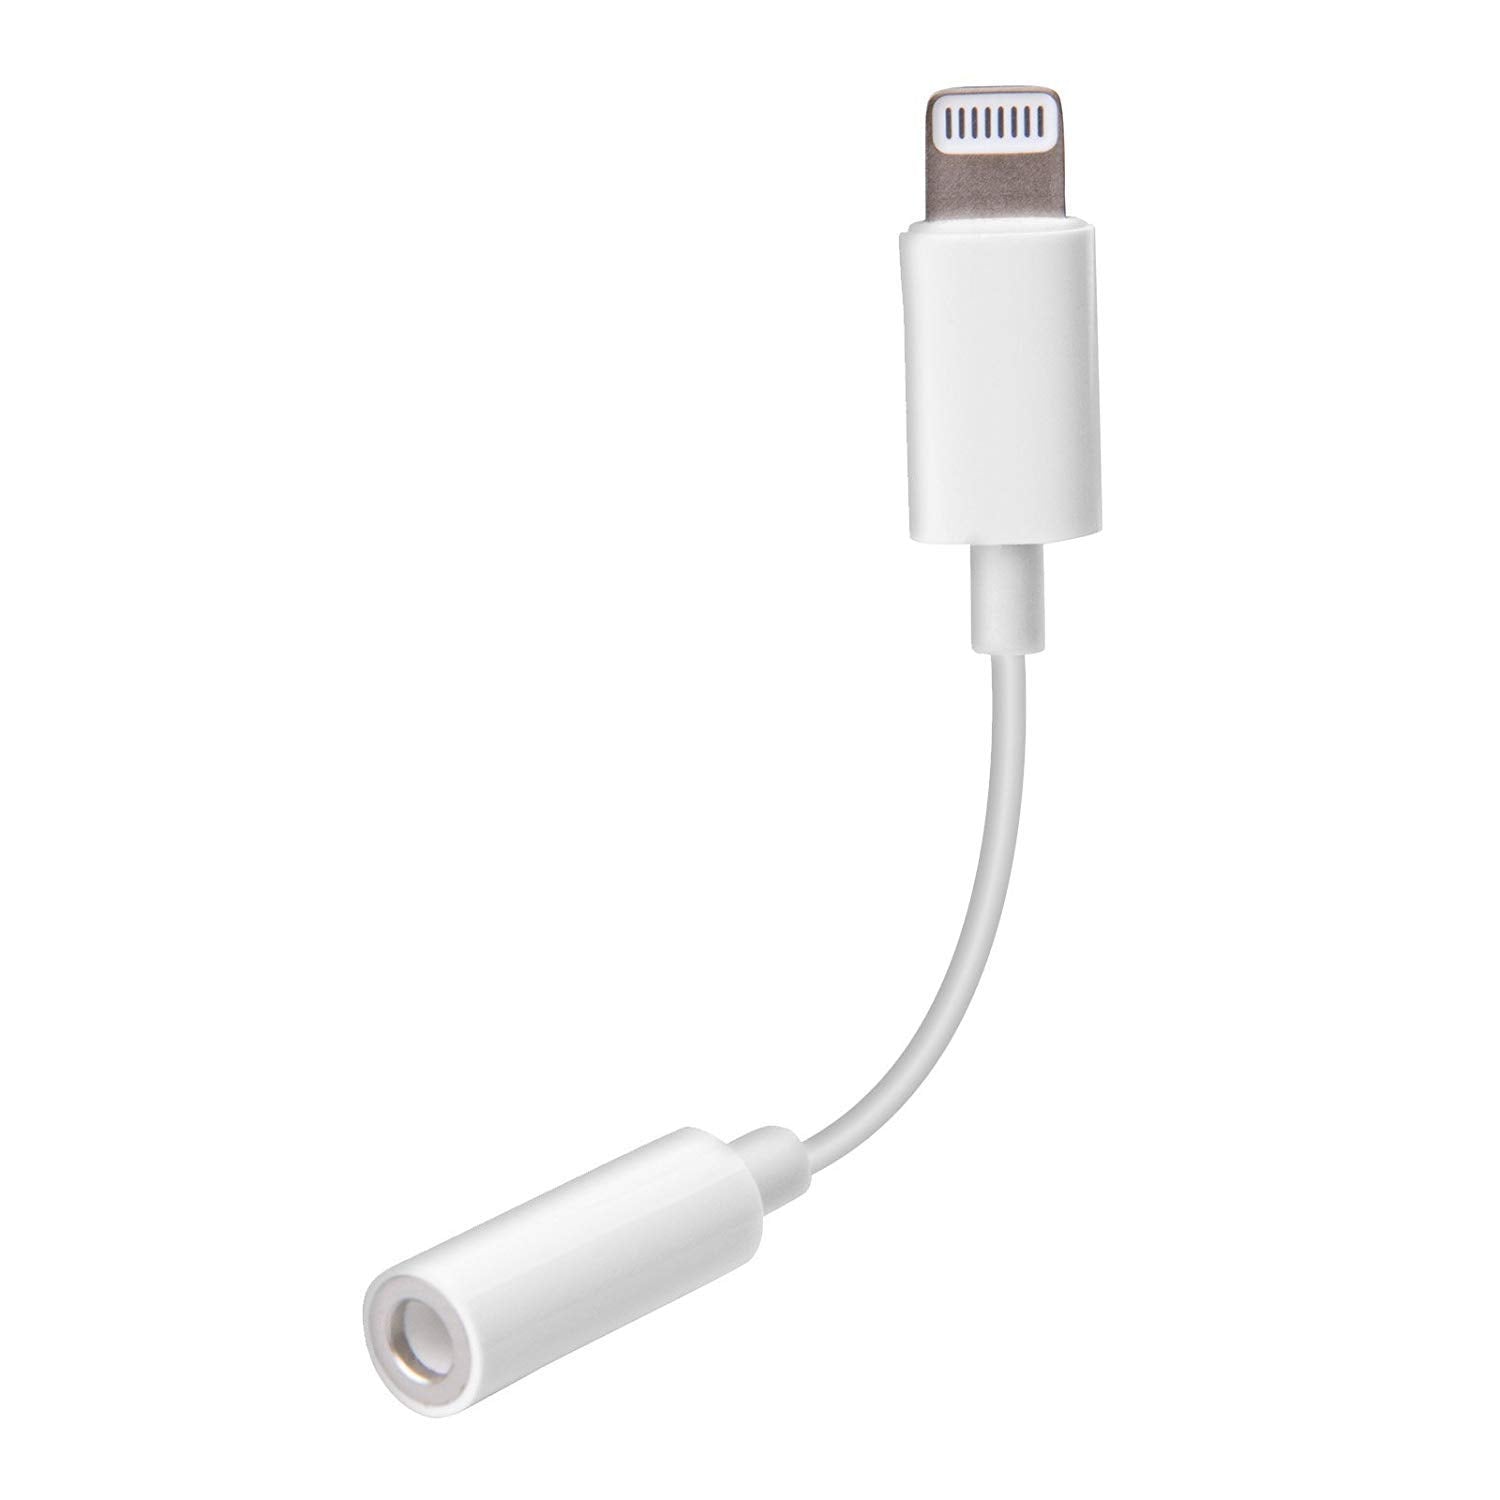 Apple iPhone 6S Plus Heaphone Jack Connector (Lightning to 3.5mm)